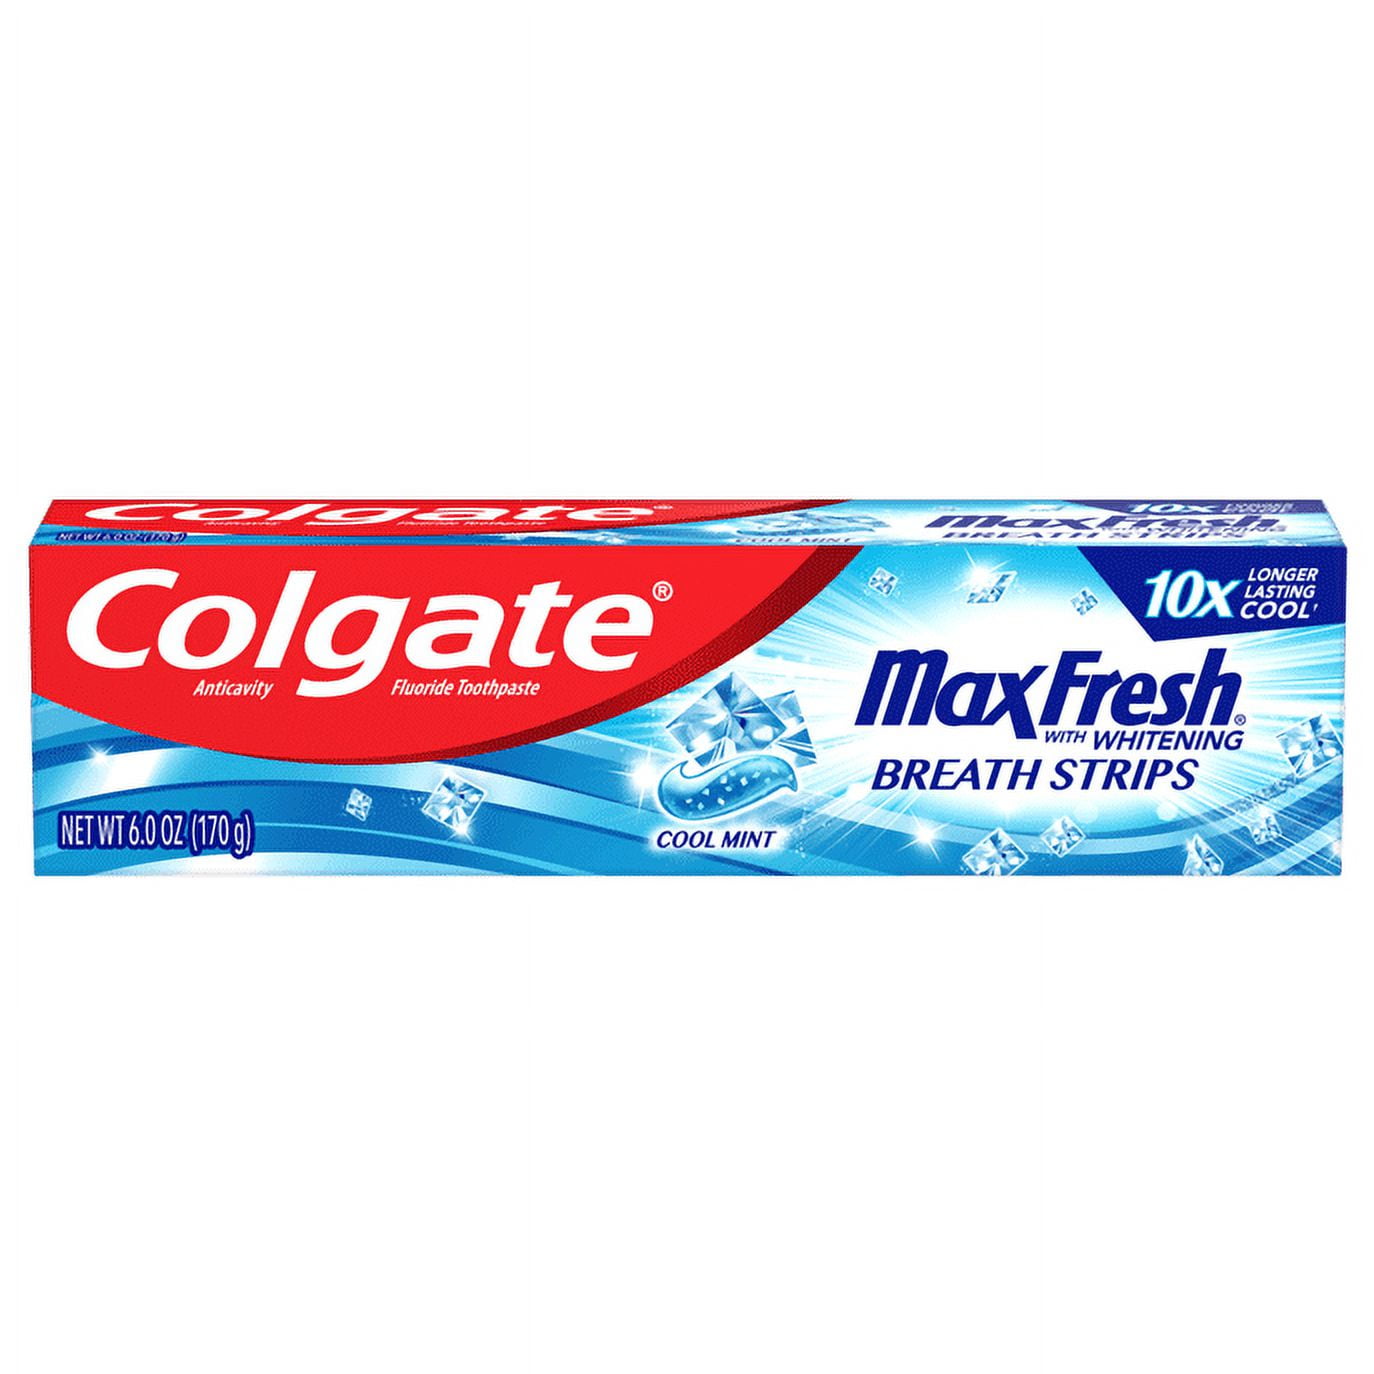 Colgate® Max White - Crystals Toothpaste